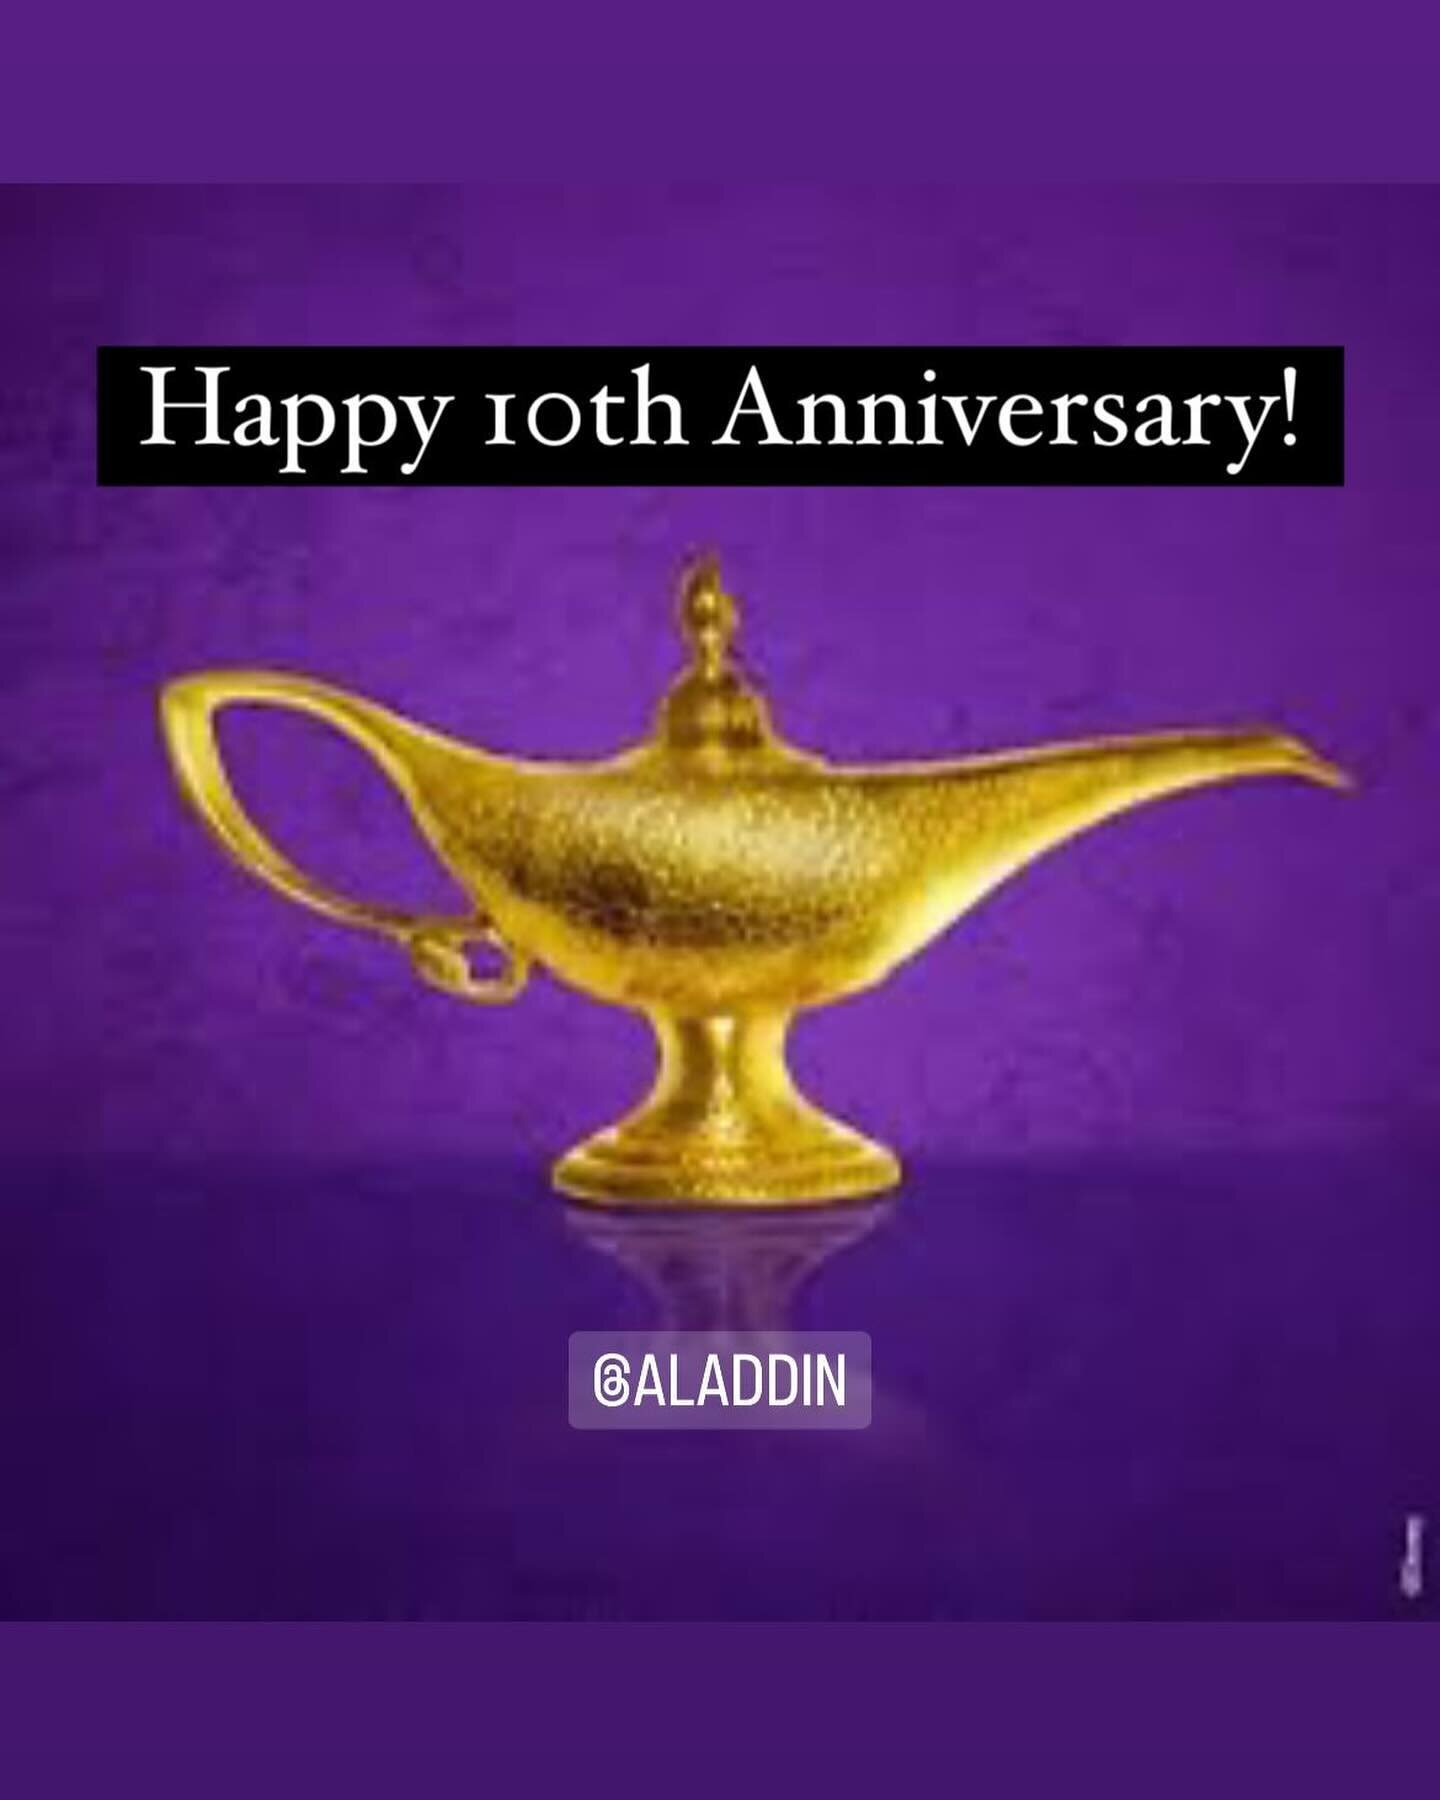 Happy 10 to my frequent Broadway home! Here&rsquo;s to many more! @aladdin